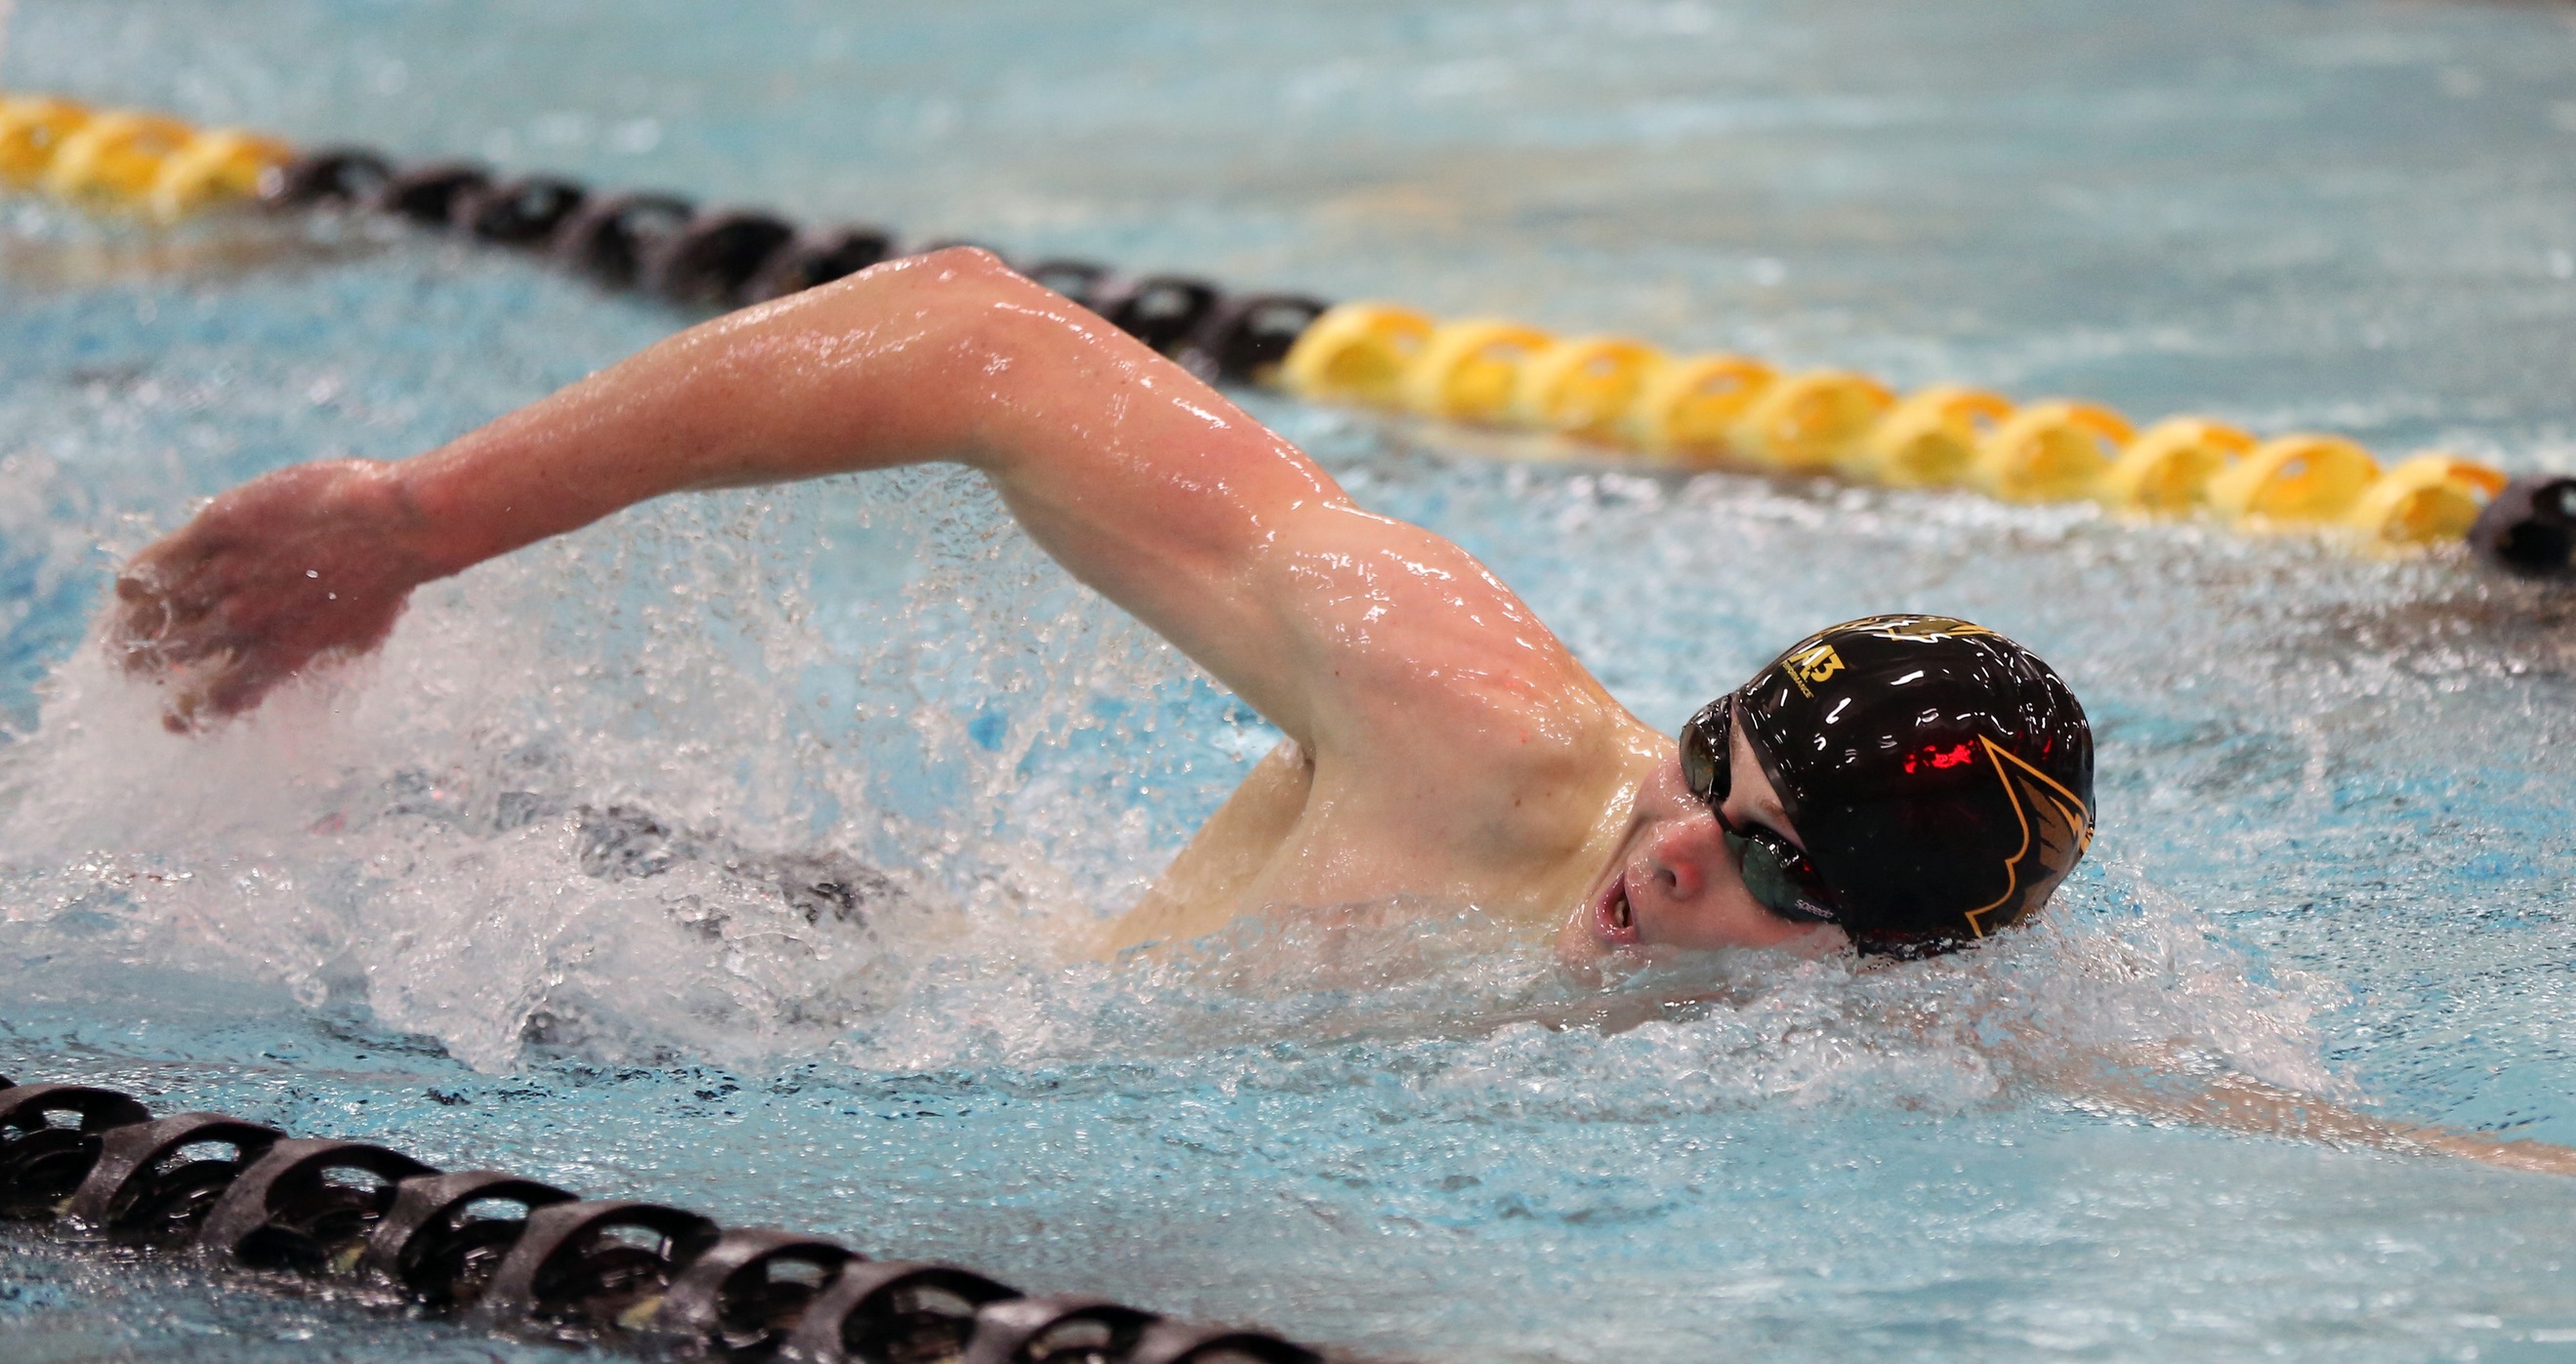 Jarrett Lieder paced UW-Oshkosh against UW-Stevens Point by winning freestyle races at 500 and 1,000 yards. He also swam on a first-place relay.